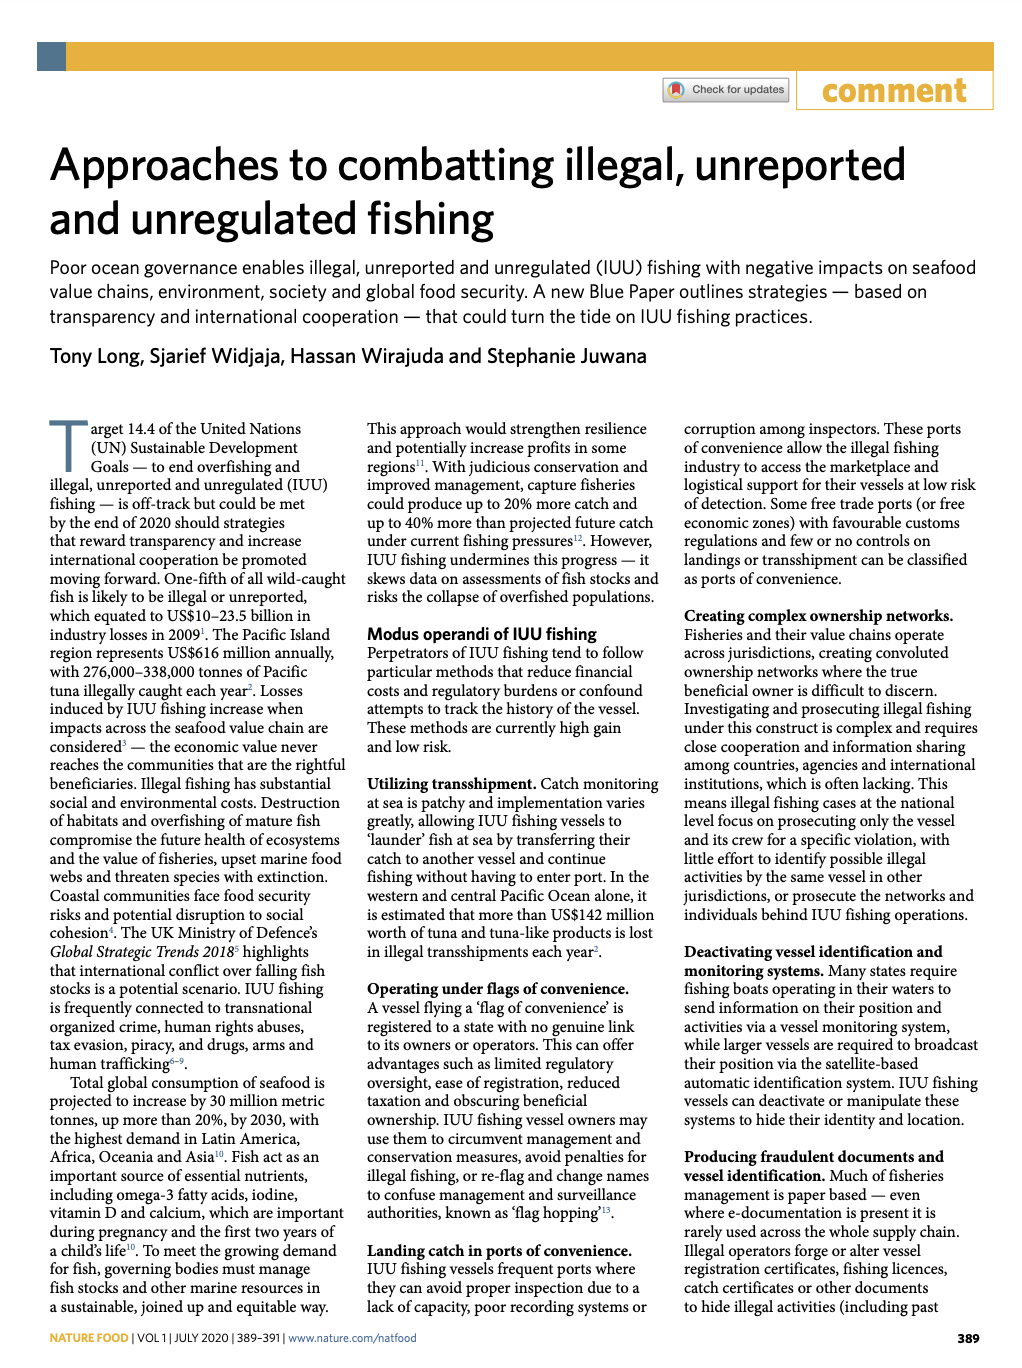 Approaches to combatting illegal, unreported, and unregulated fishing